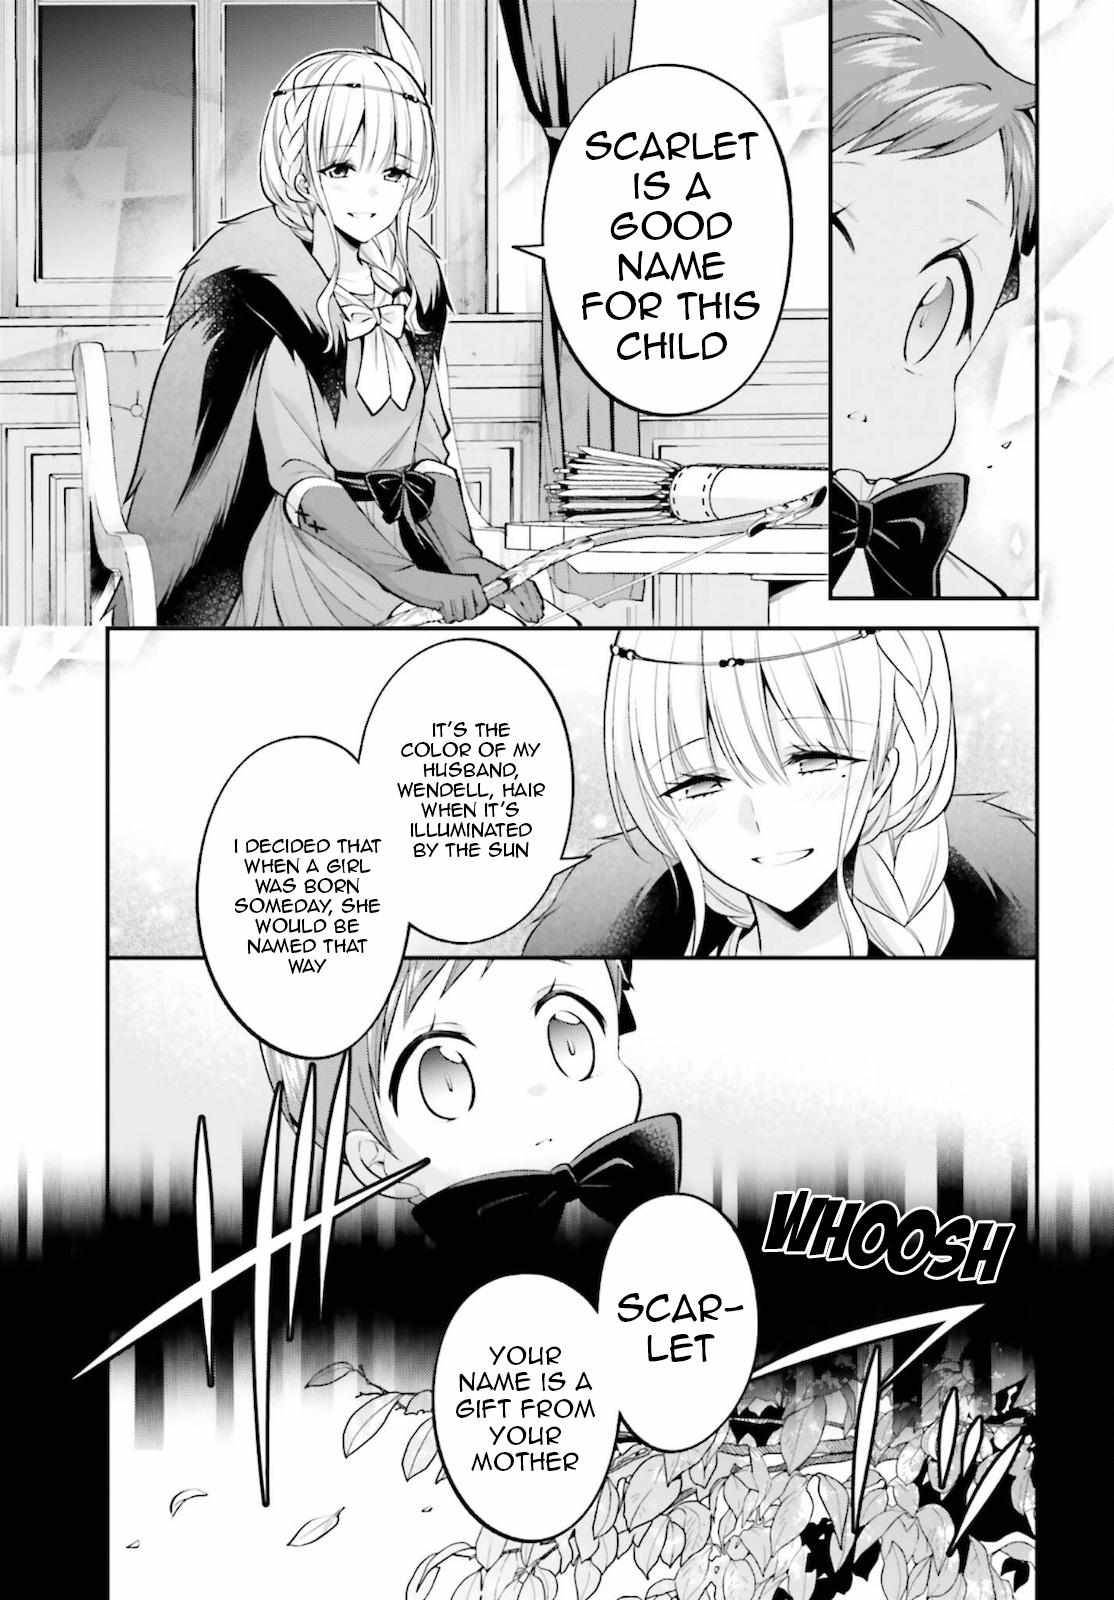 The Villainess Who Has Been Killed 108 Times - chapter 10 - #5